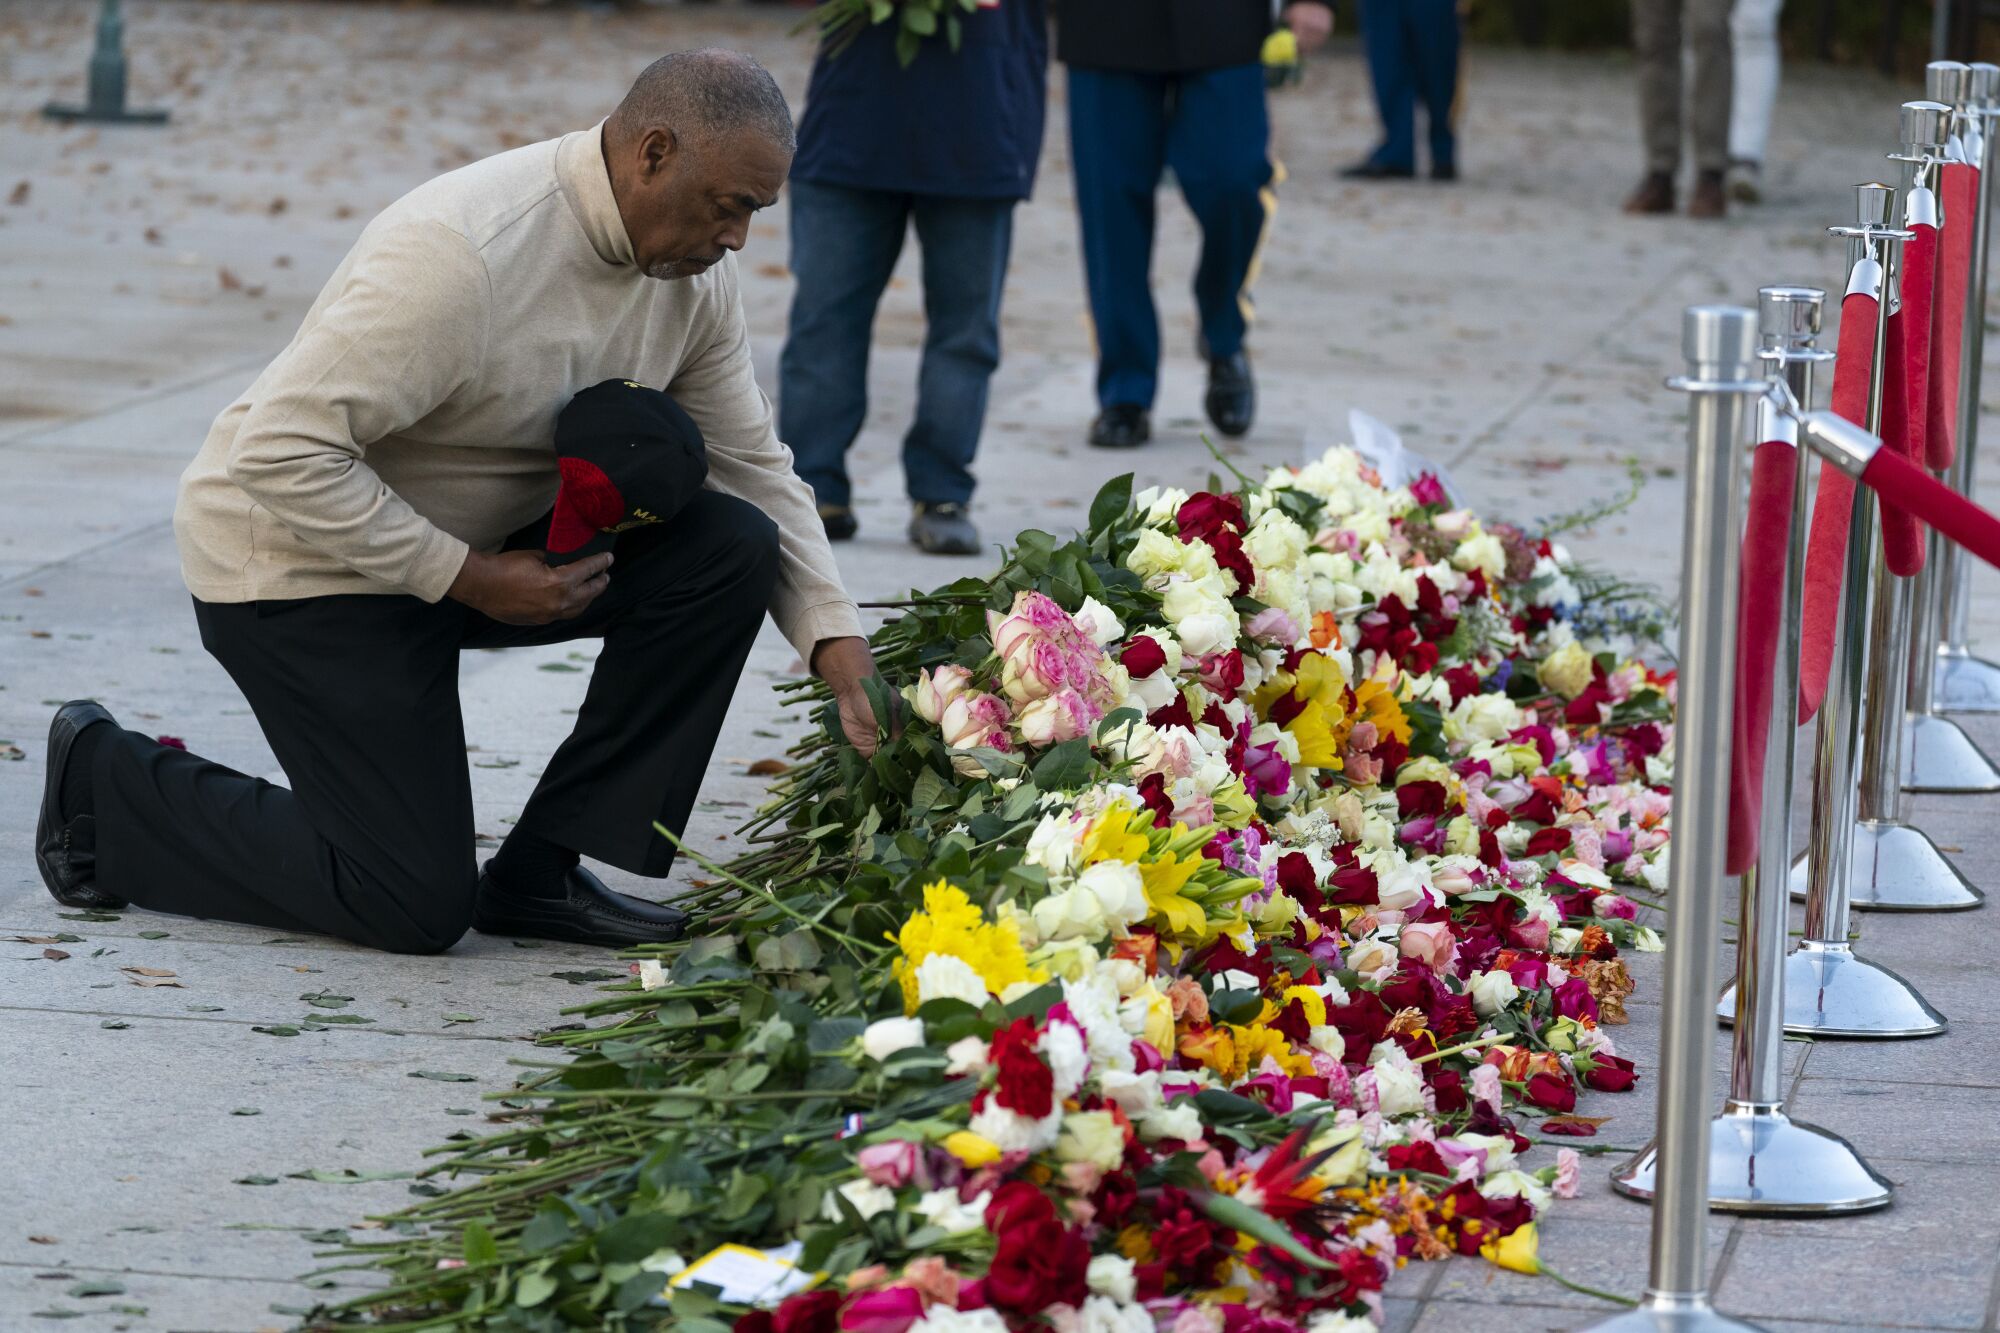 A man kneels to place flowers